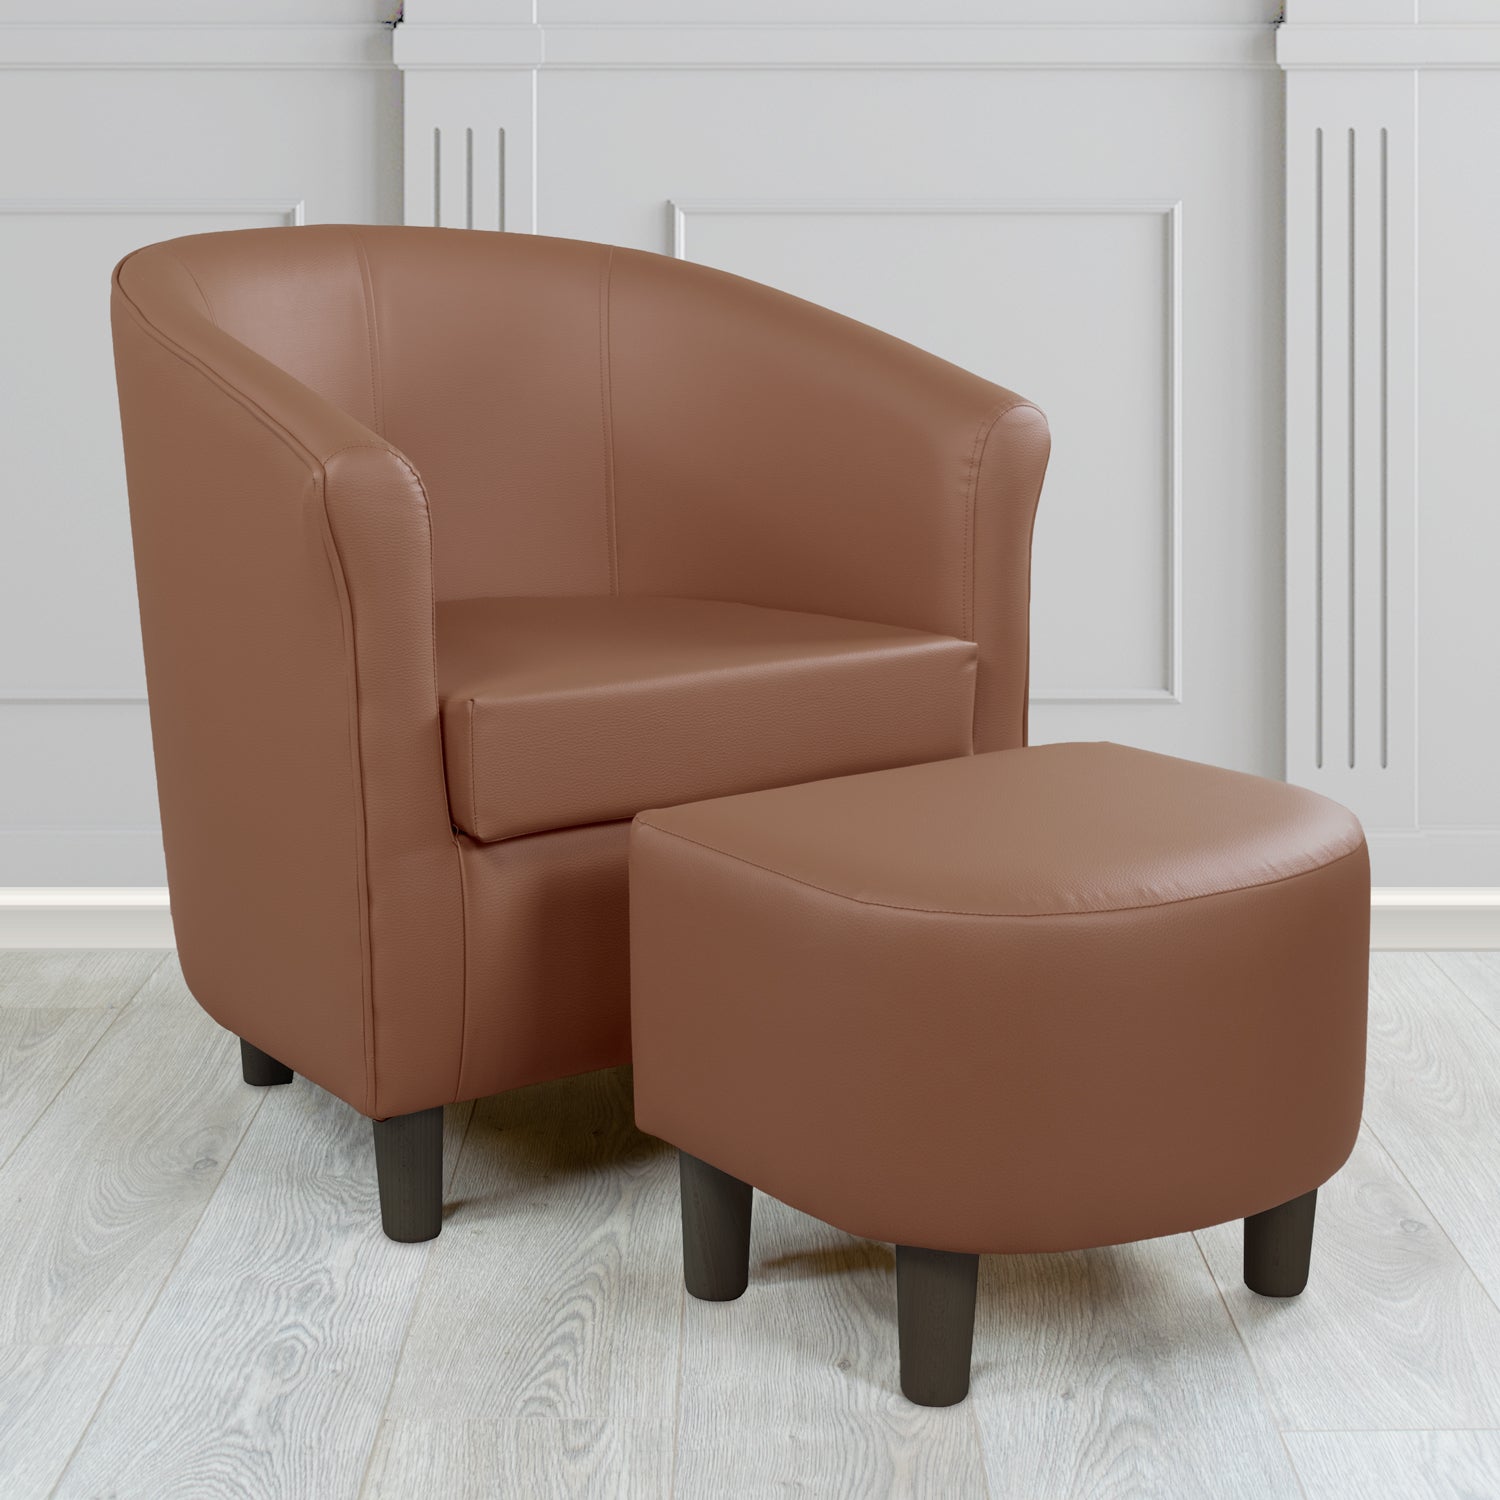 Tuscany Just Colour Walnut Faux Leather Tub Chair with Footstool Set - The Tub Chair Shop